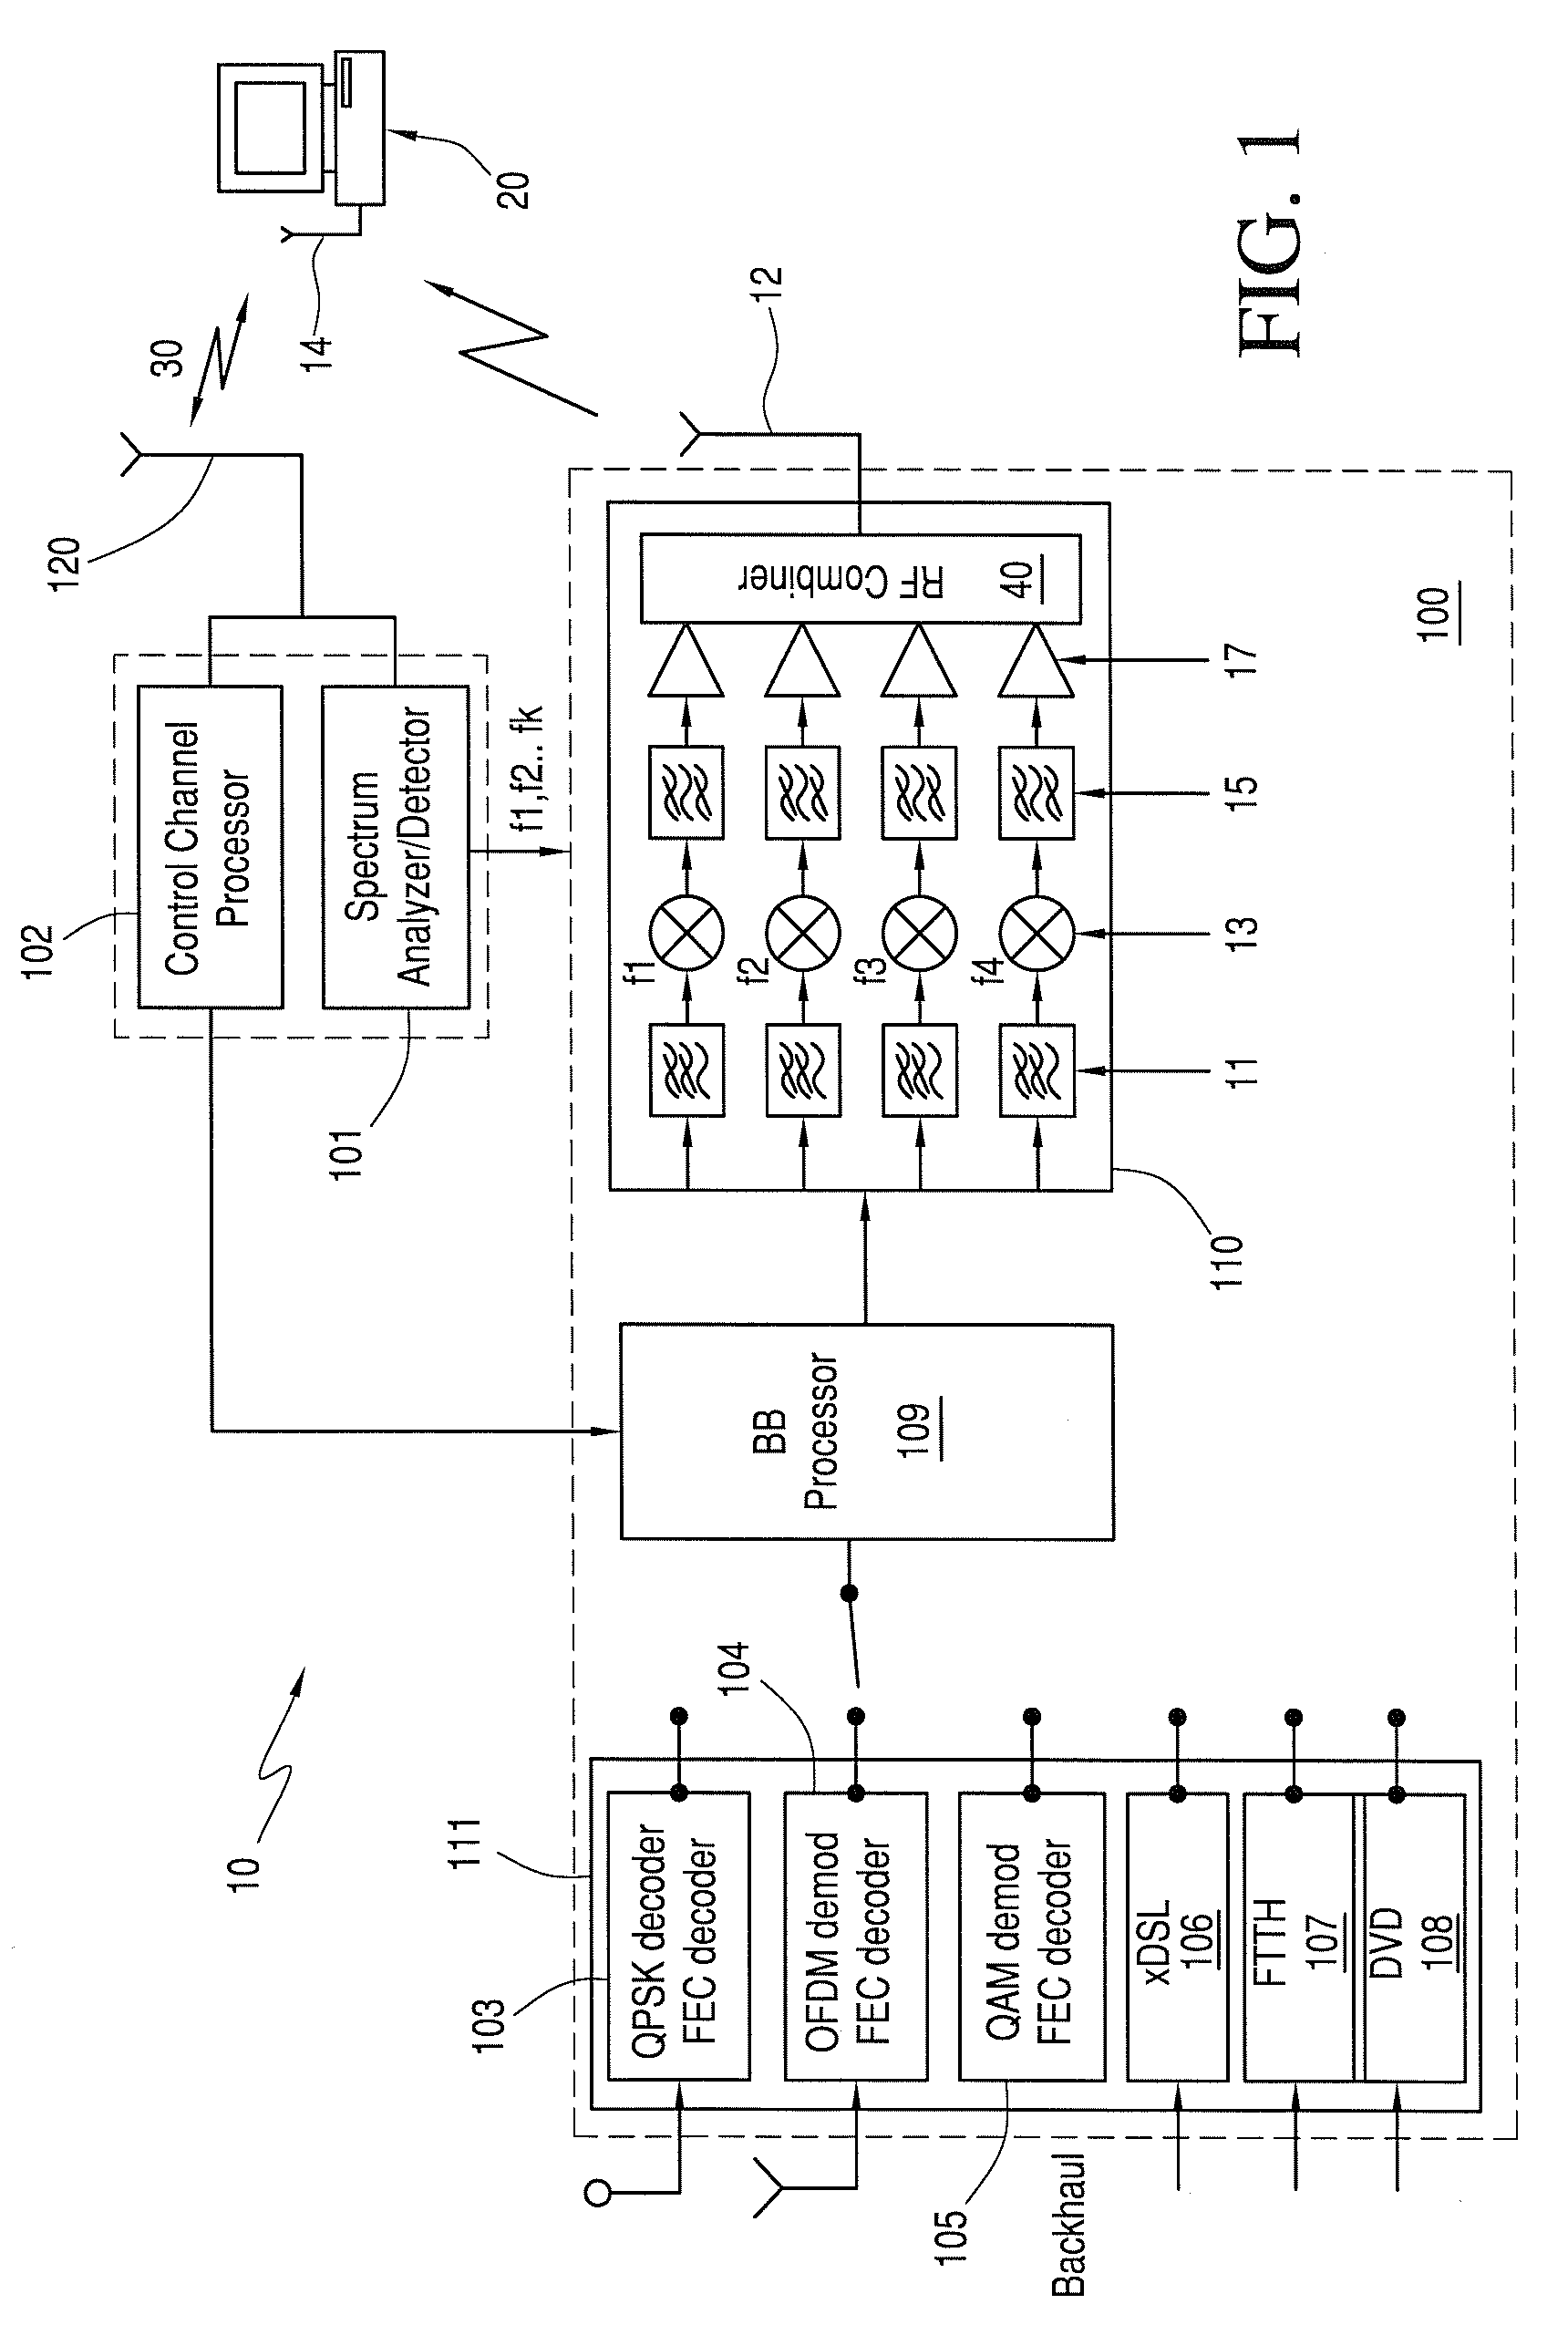 System and apparatus for cascading and redistributing HDTV signals